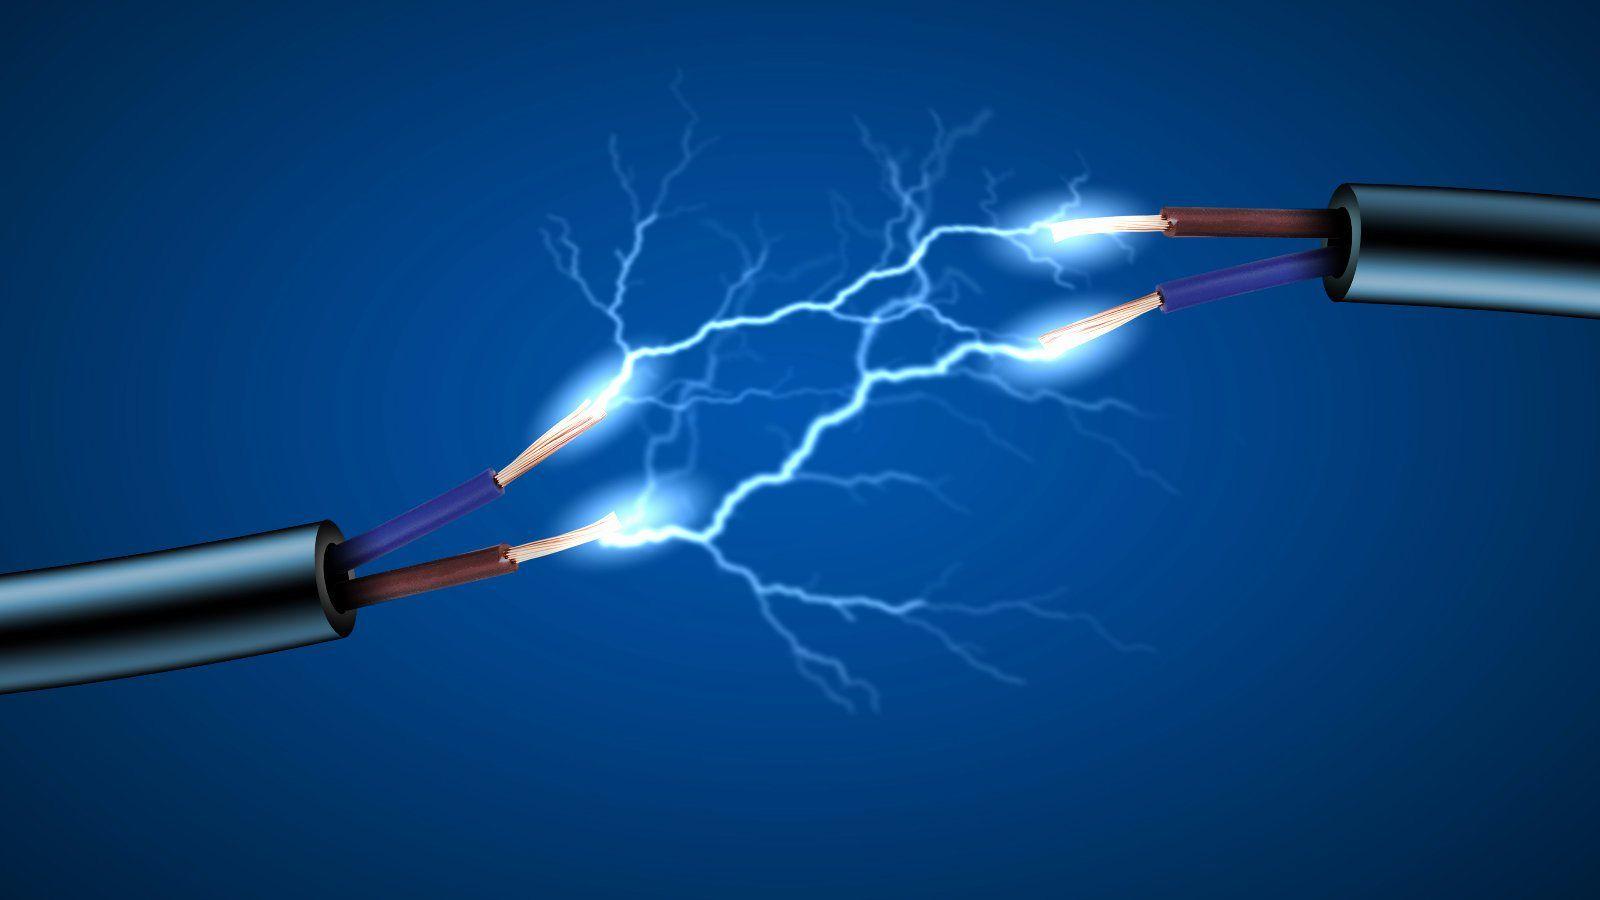 HD Creative Electrical Picture, Full HD Wallpaper